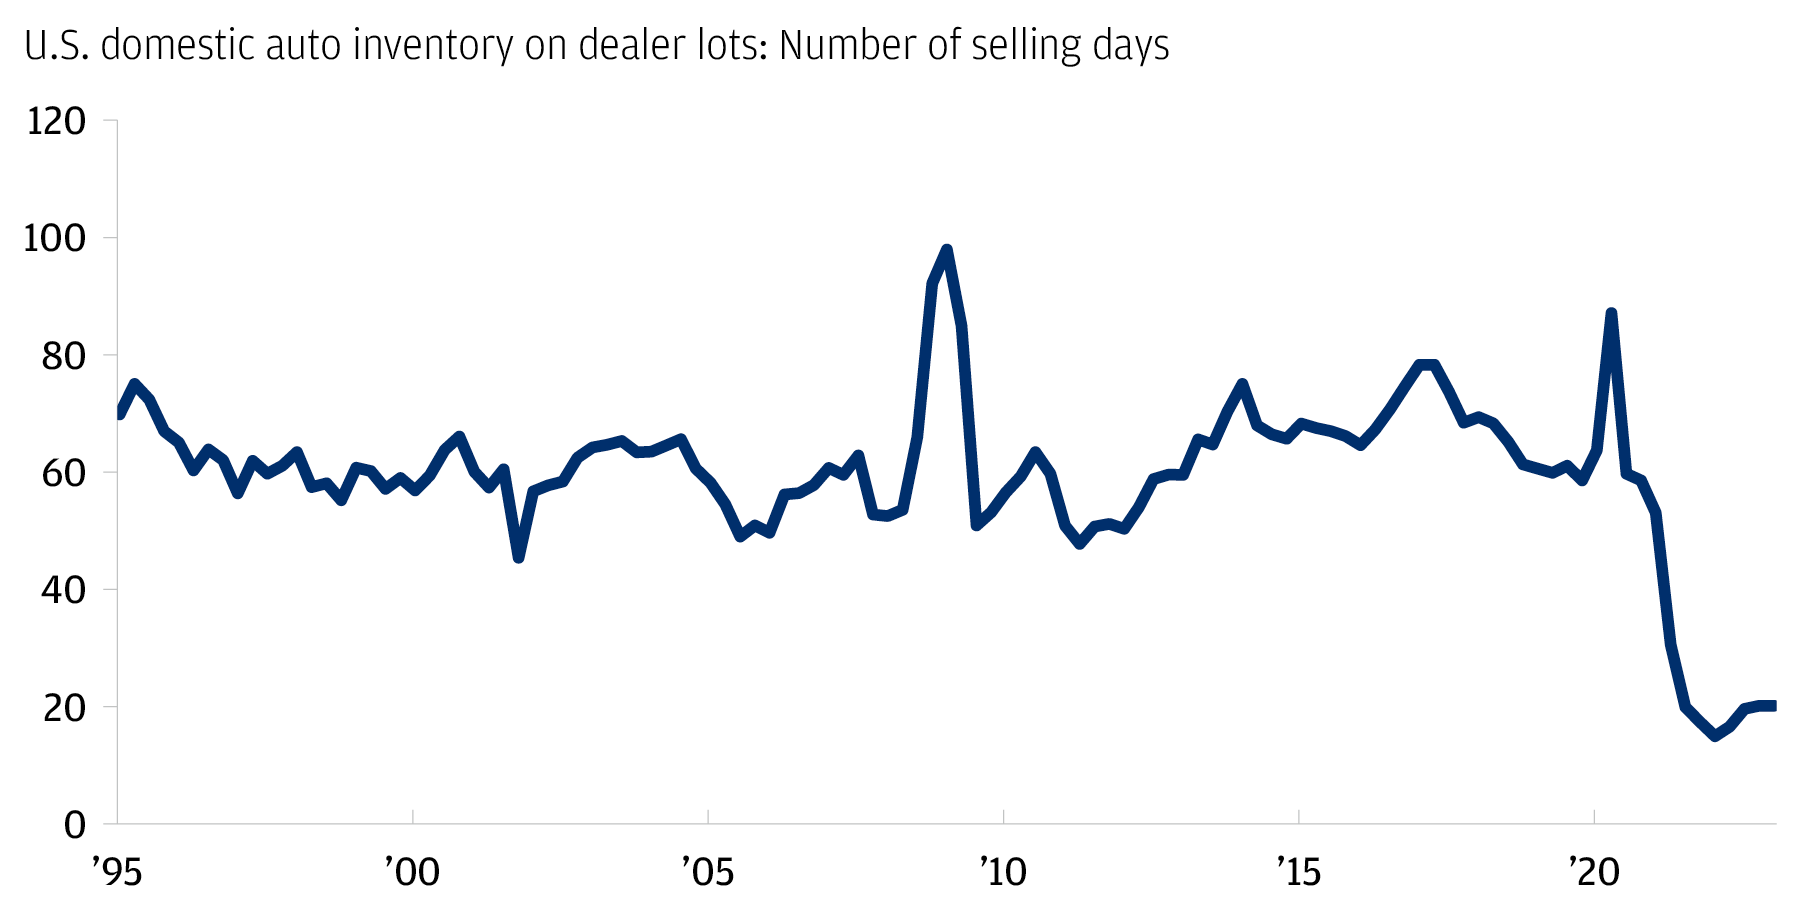 The chart describes domestic auto inventory as in number of selling days from 1995 to 2022.